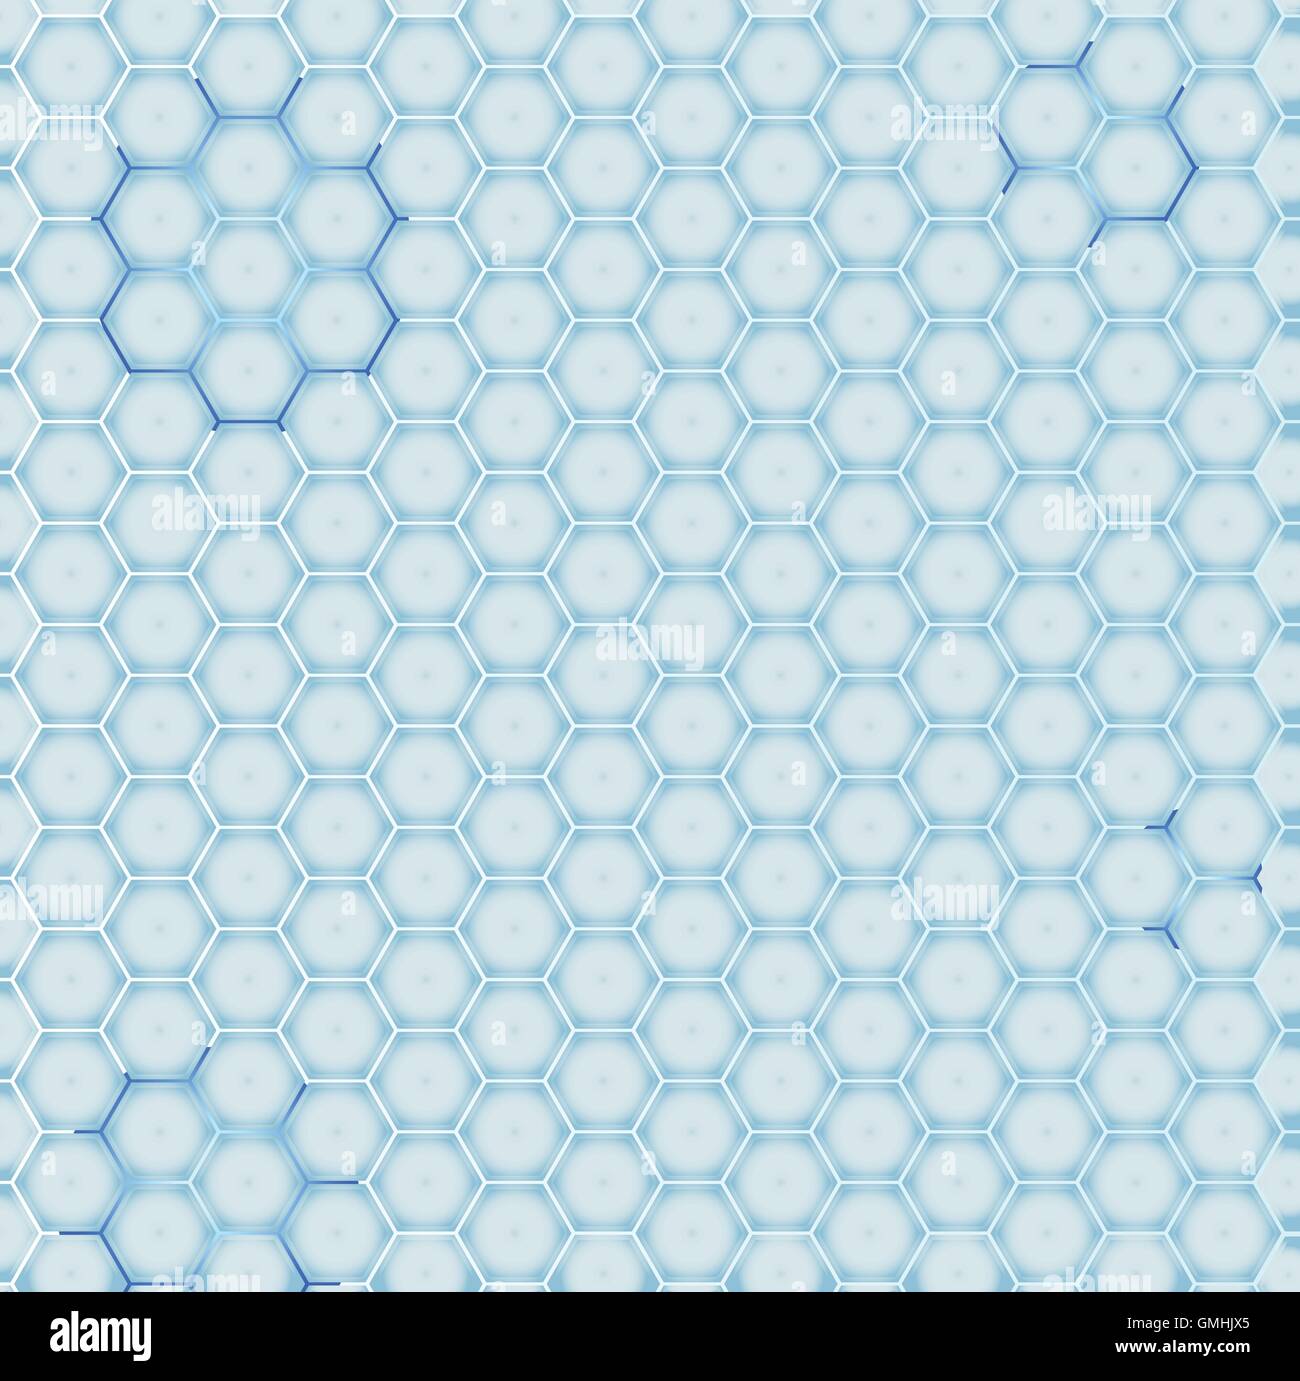 Ice Cold Plate Stock Vector